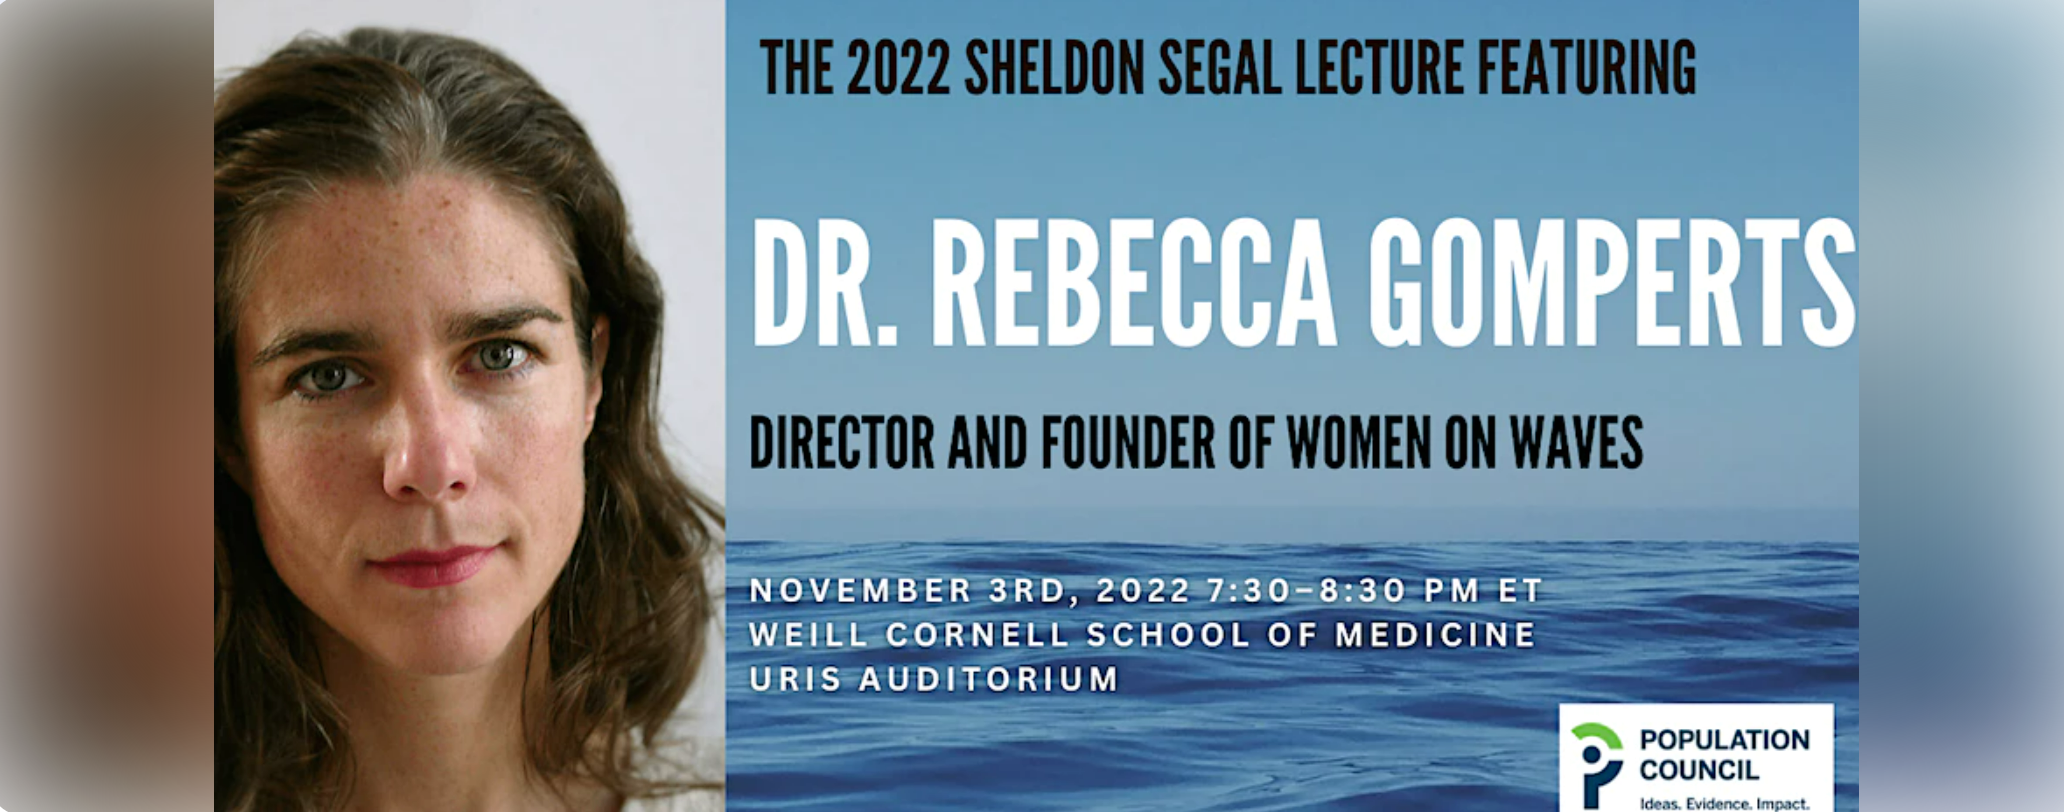 banner for the 2022 Sheldon Segal lecture featuring Dr. Rebecca Gomperts Ideas. Evidence. Impact.